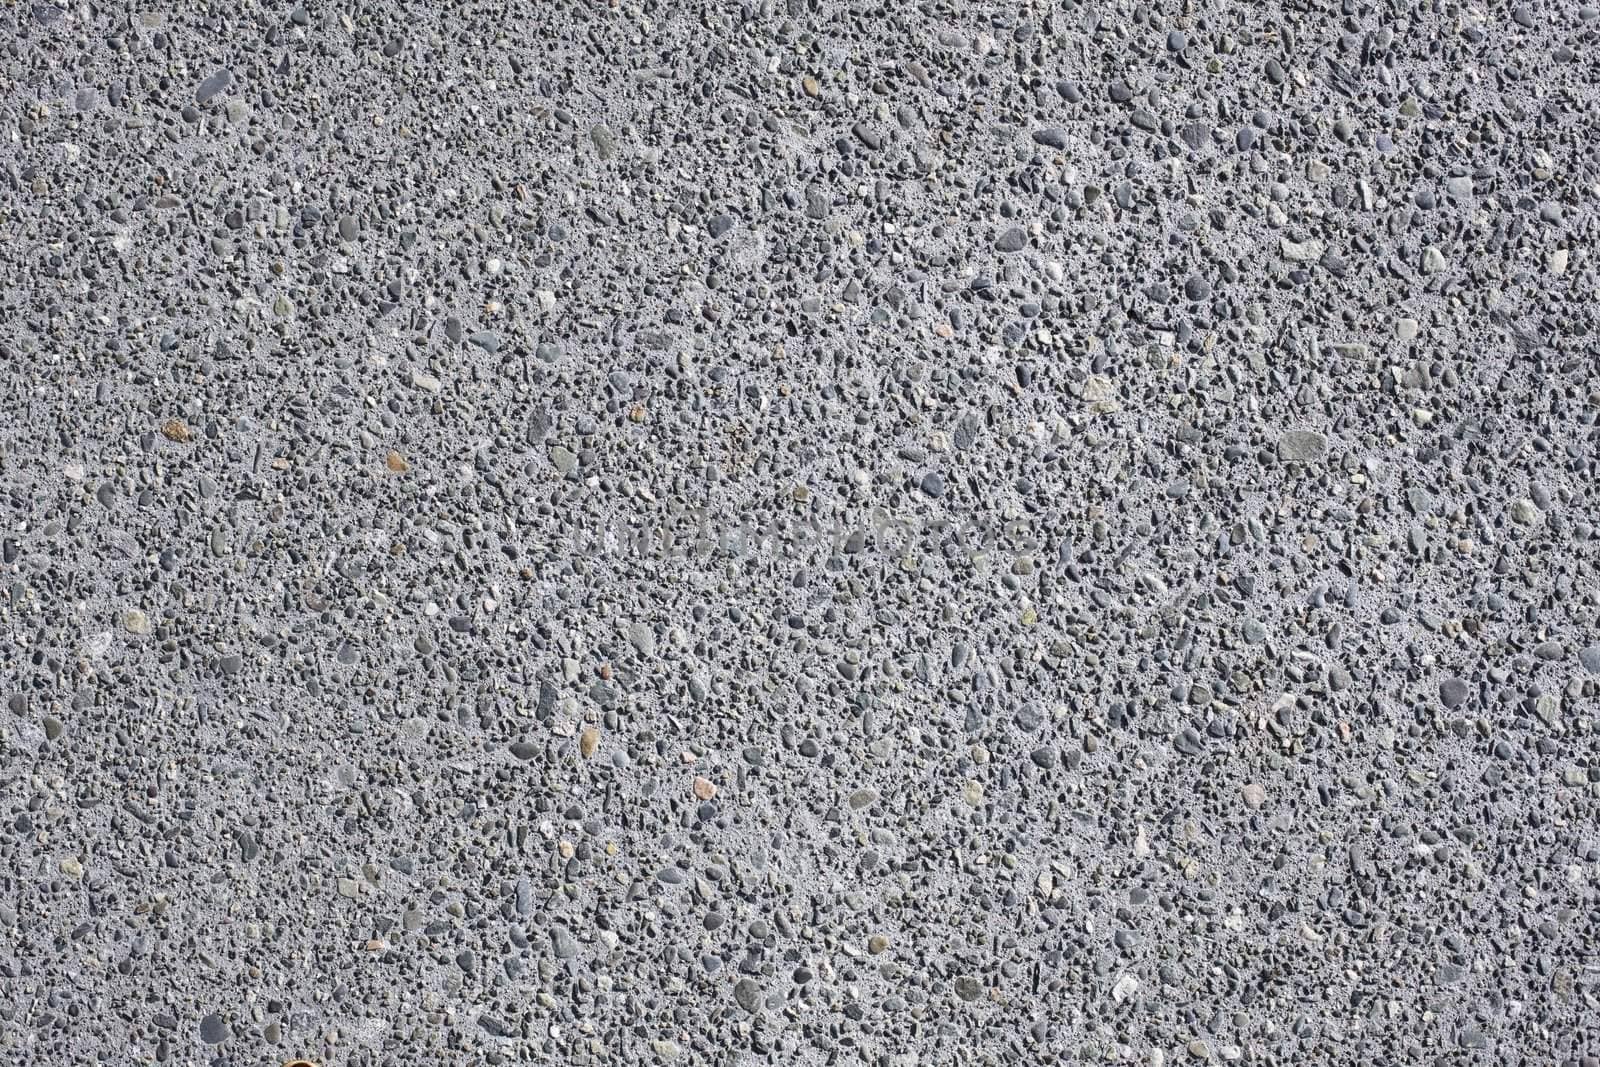 Closeup Detail of Gray Concrete With Stones